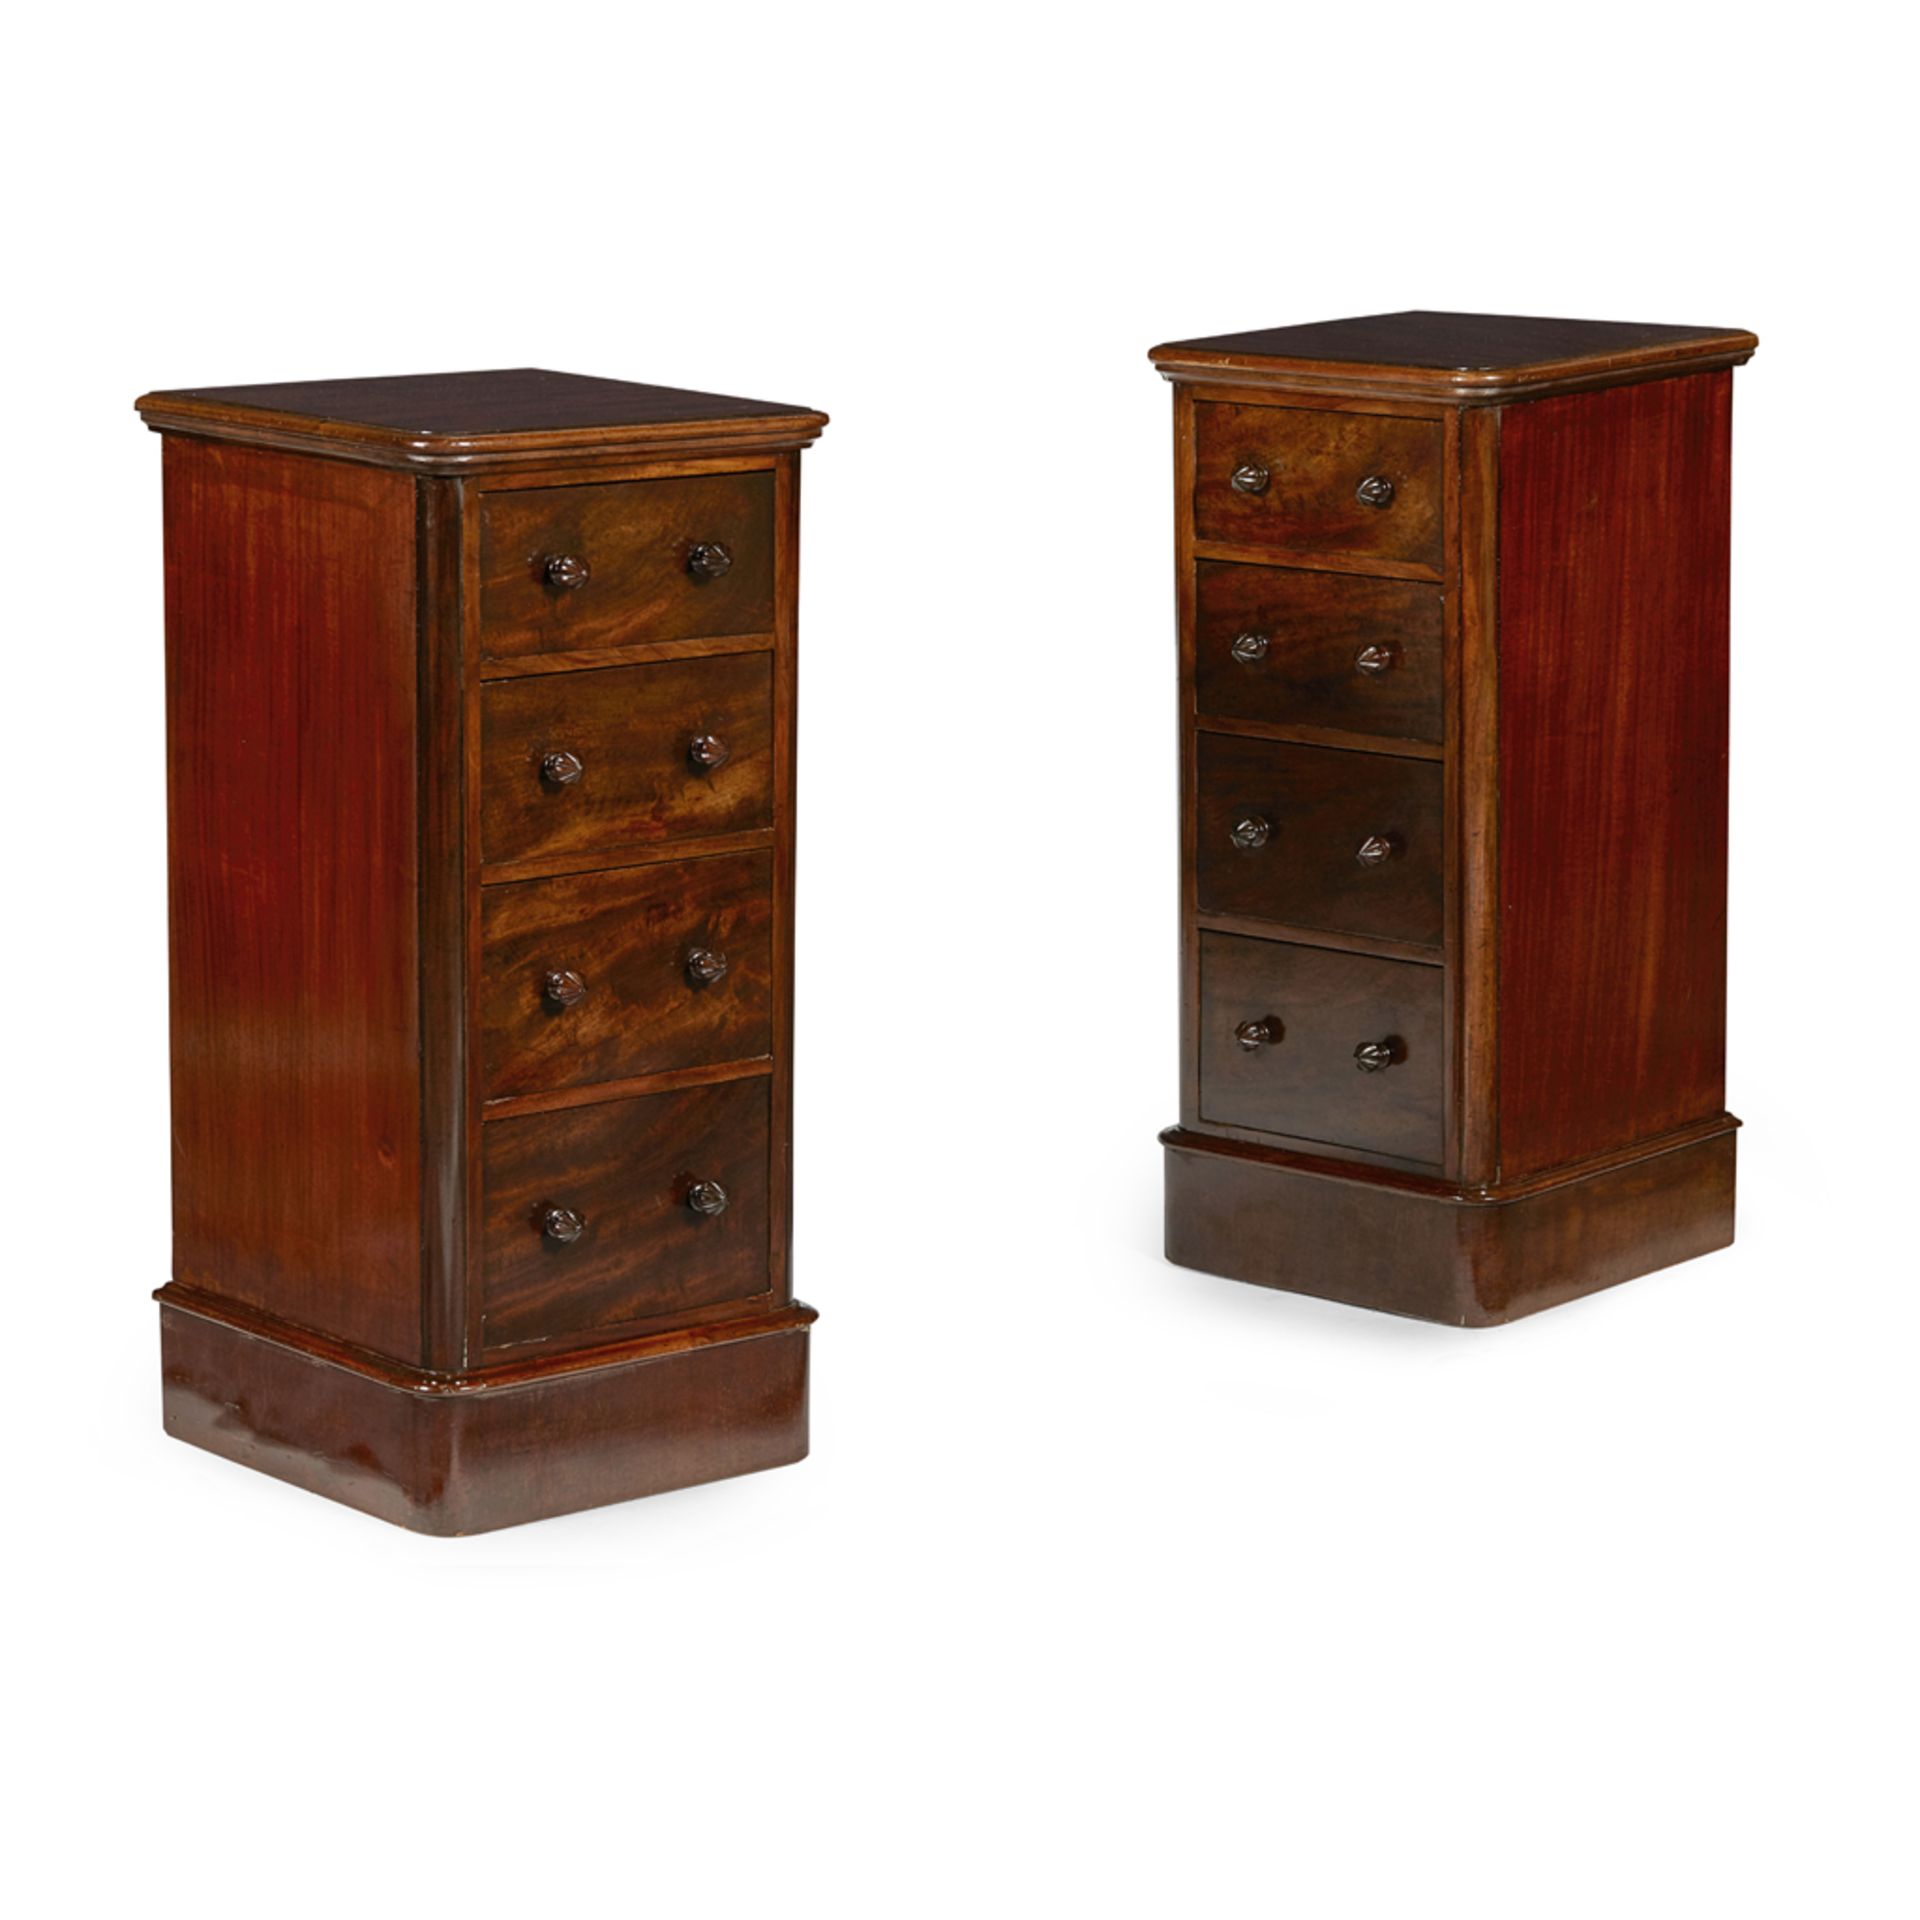 PAIR OF WILLIAM IV MAHOGANY BEDSIDE CHESTS 19TH CENTURY WITH ALTERATIONS the moulded tops over